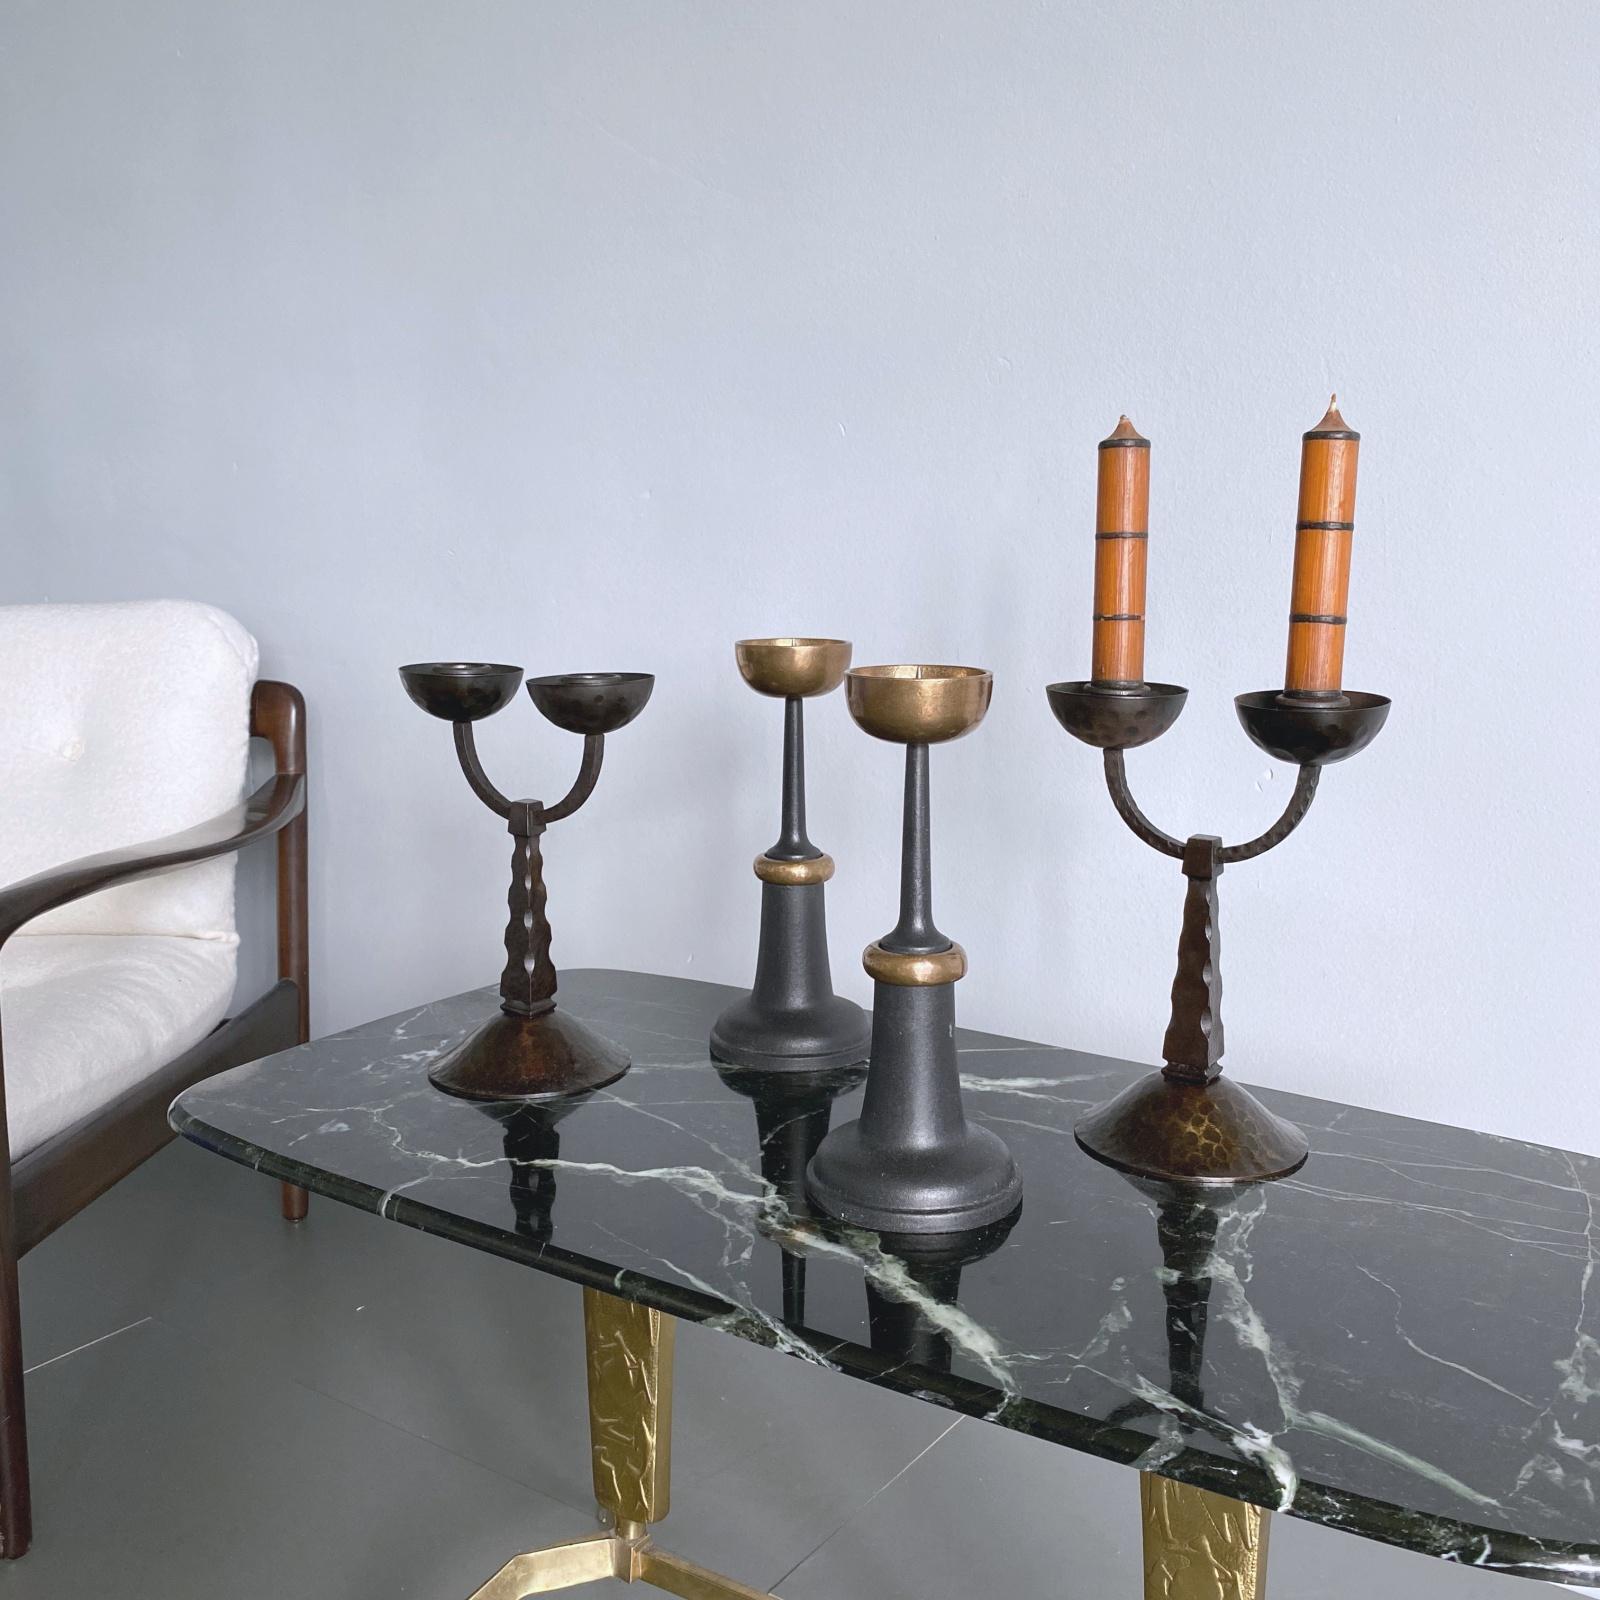 20th Century Pair of Midcentury Modern Forged Wrought Iron Candleholder, 1950s, Austria